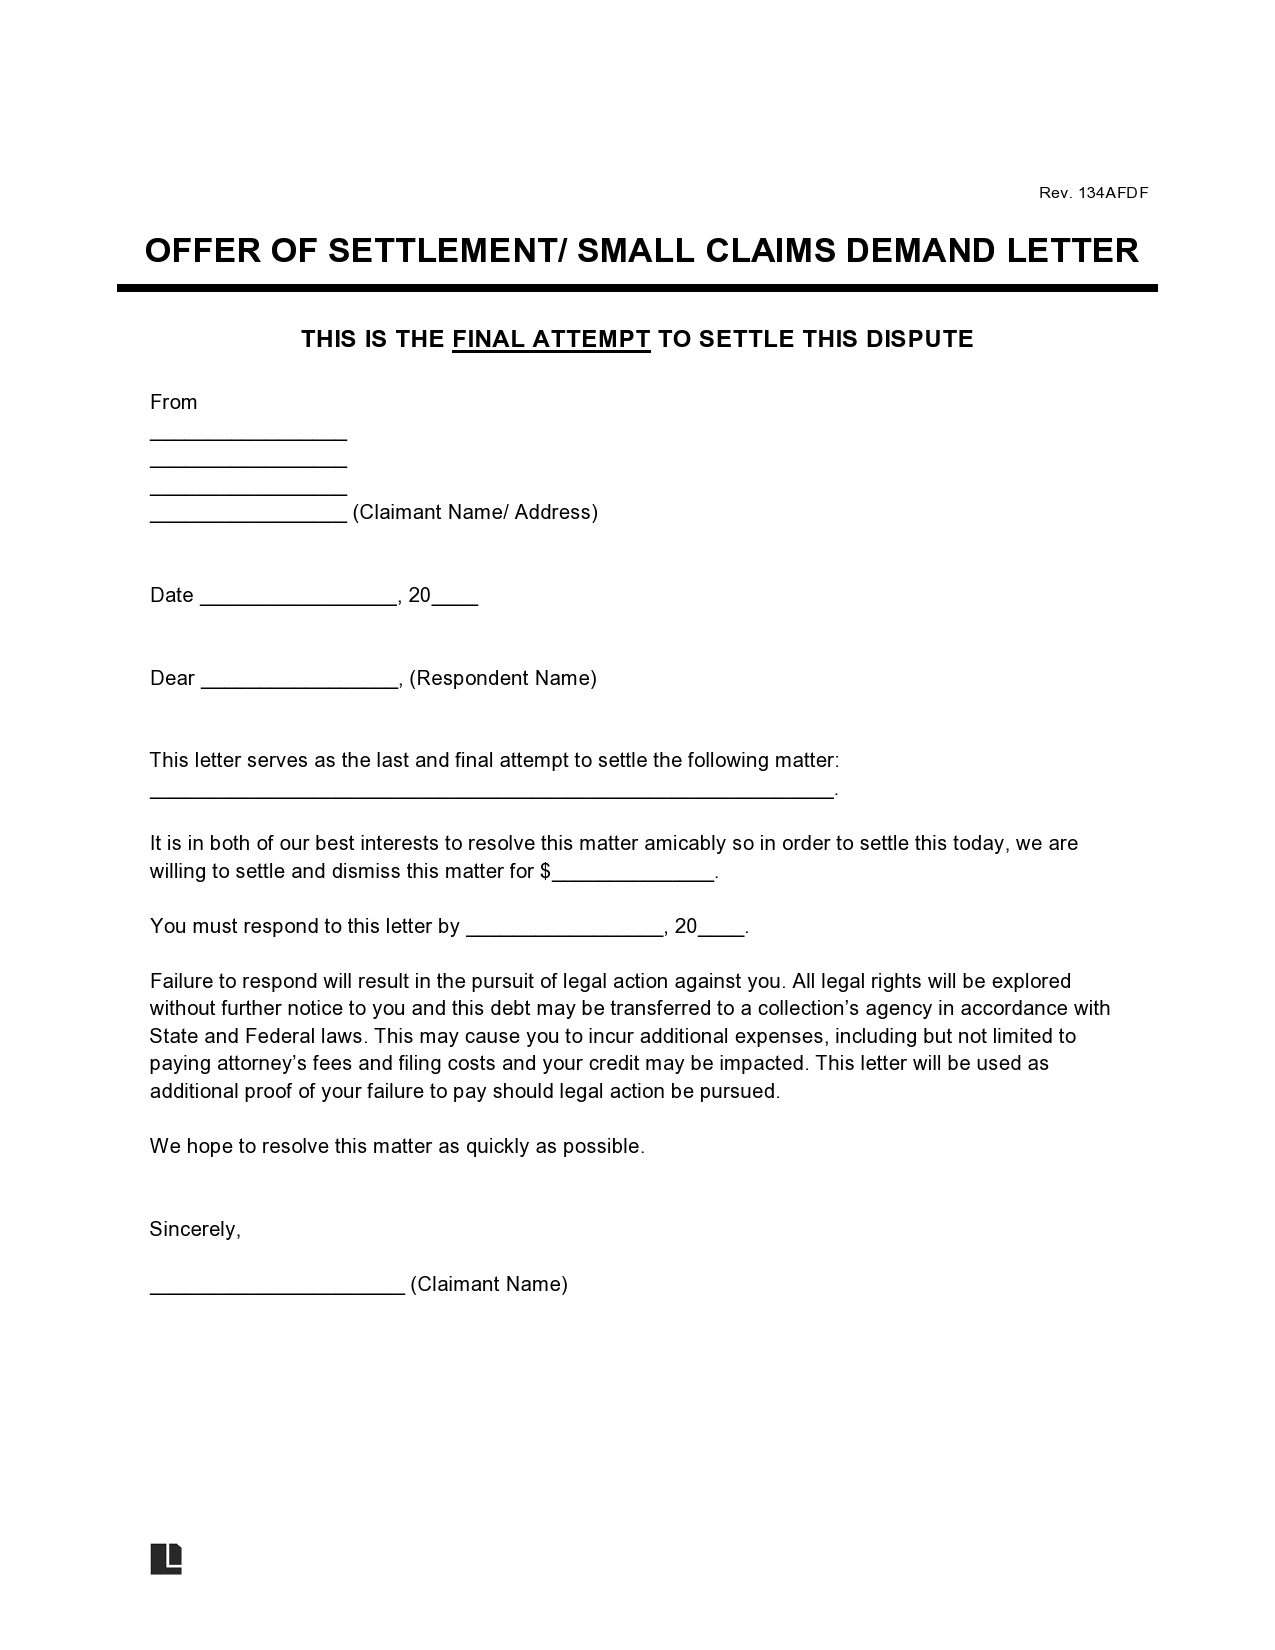 small claims demand letter